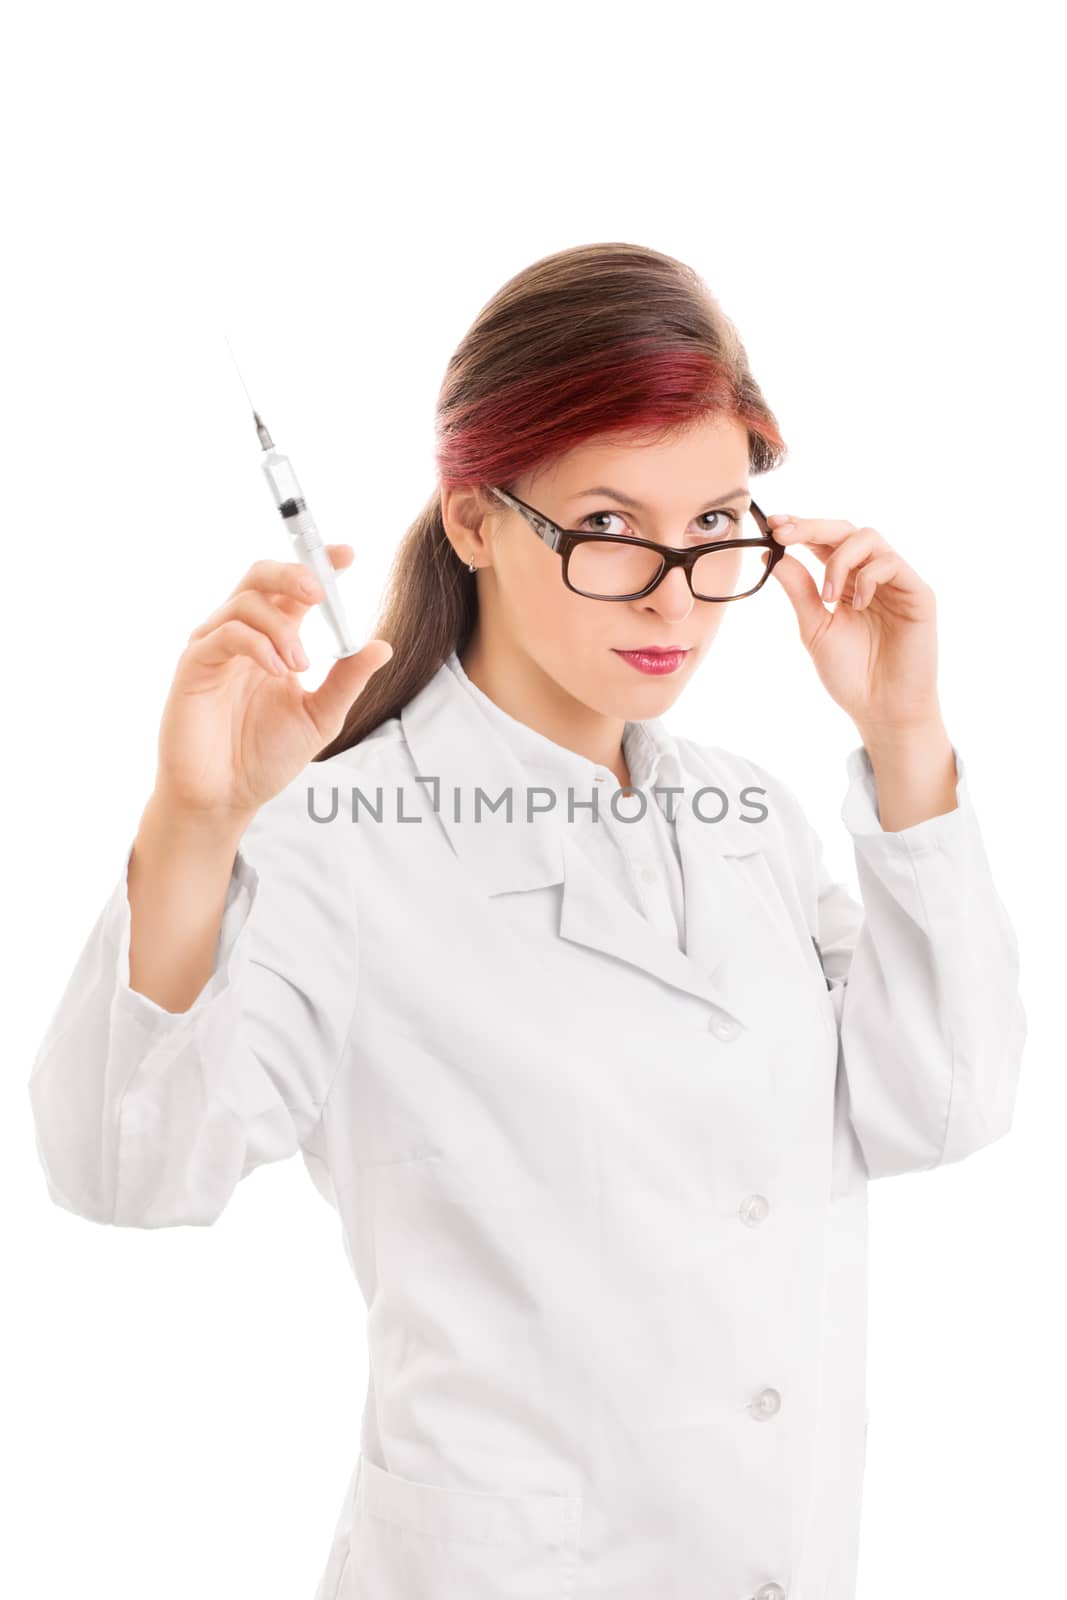 Come on now, it's your turn. Young doctor giving an injection, isolated on white background.